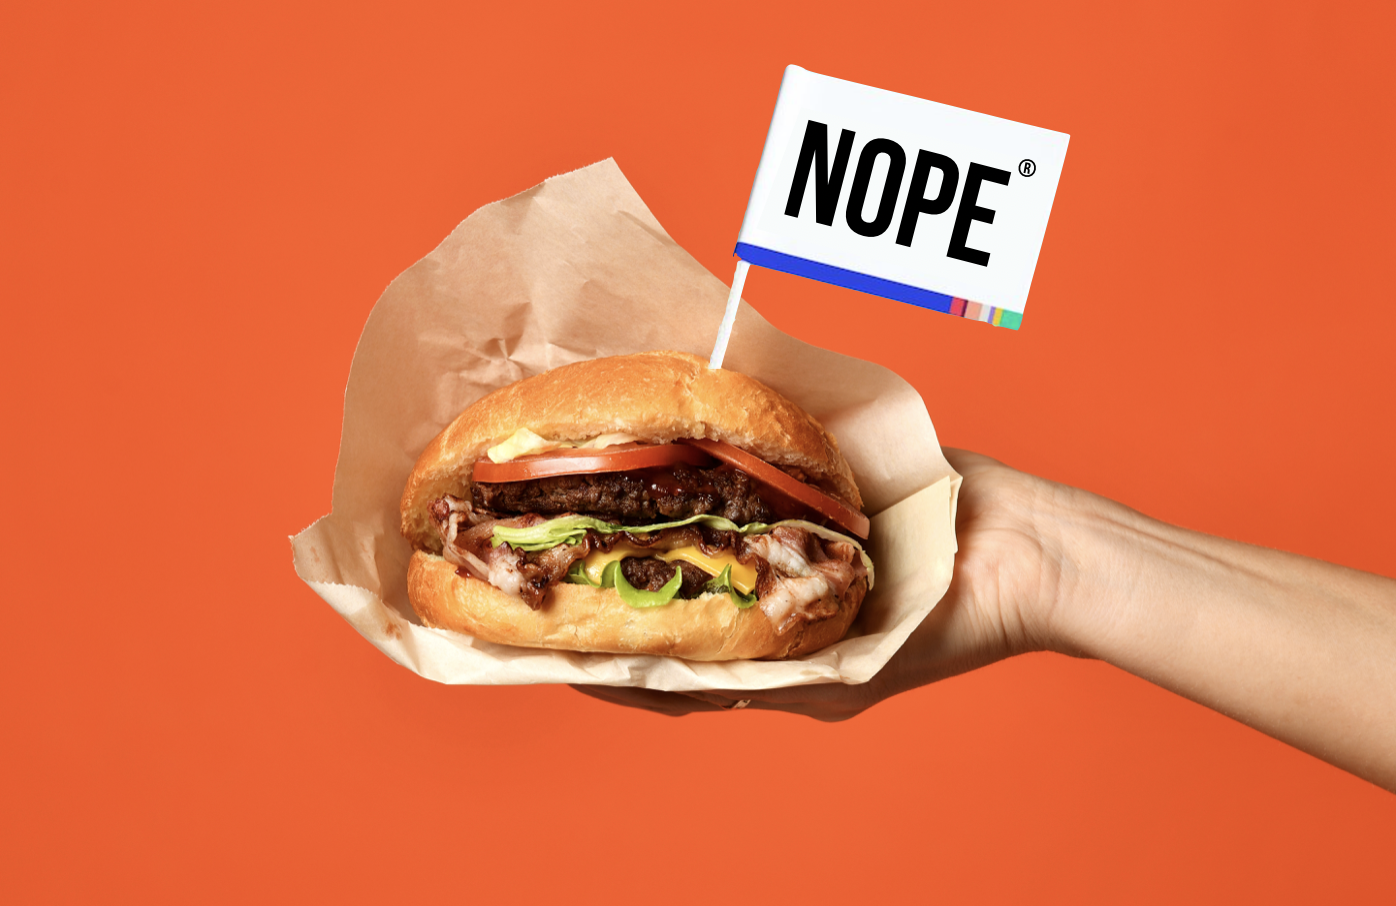 impossible burger attack on regenerative ag response